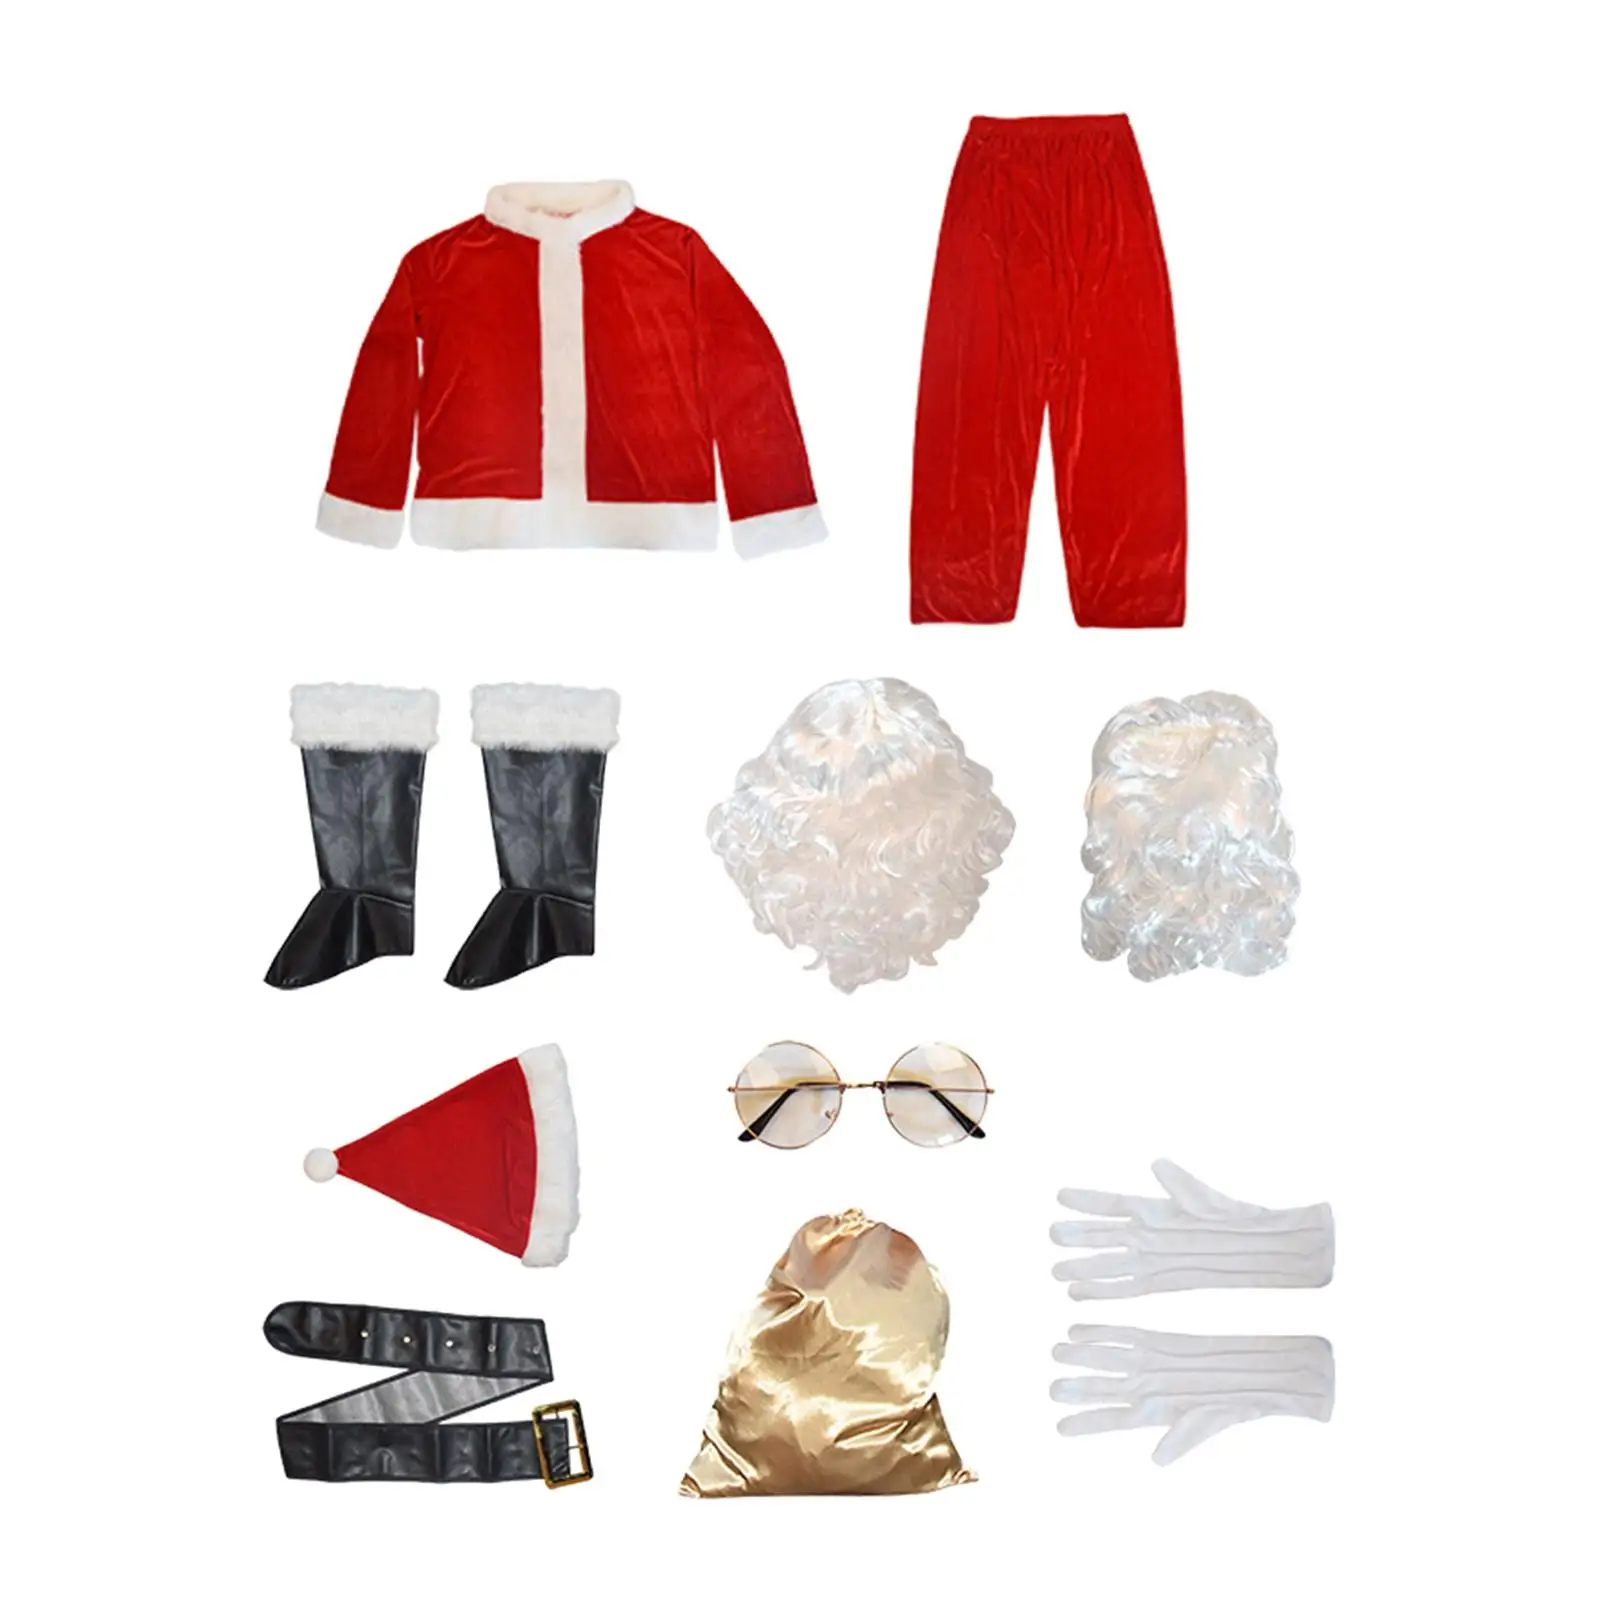 10x Santa Costume Reusable Belt Beard Santa Claus Hat Men Gloves Cosplay Suit for Holidays Party Stage Performance Carnival Xmas